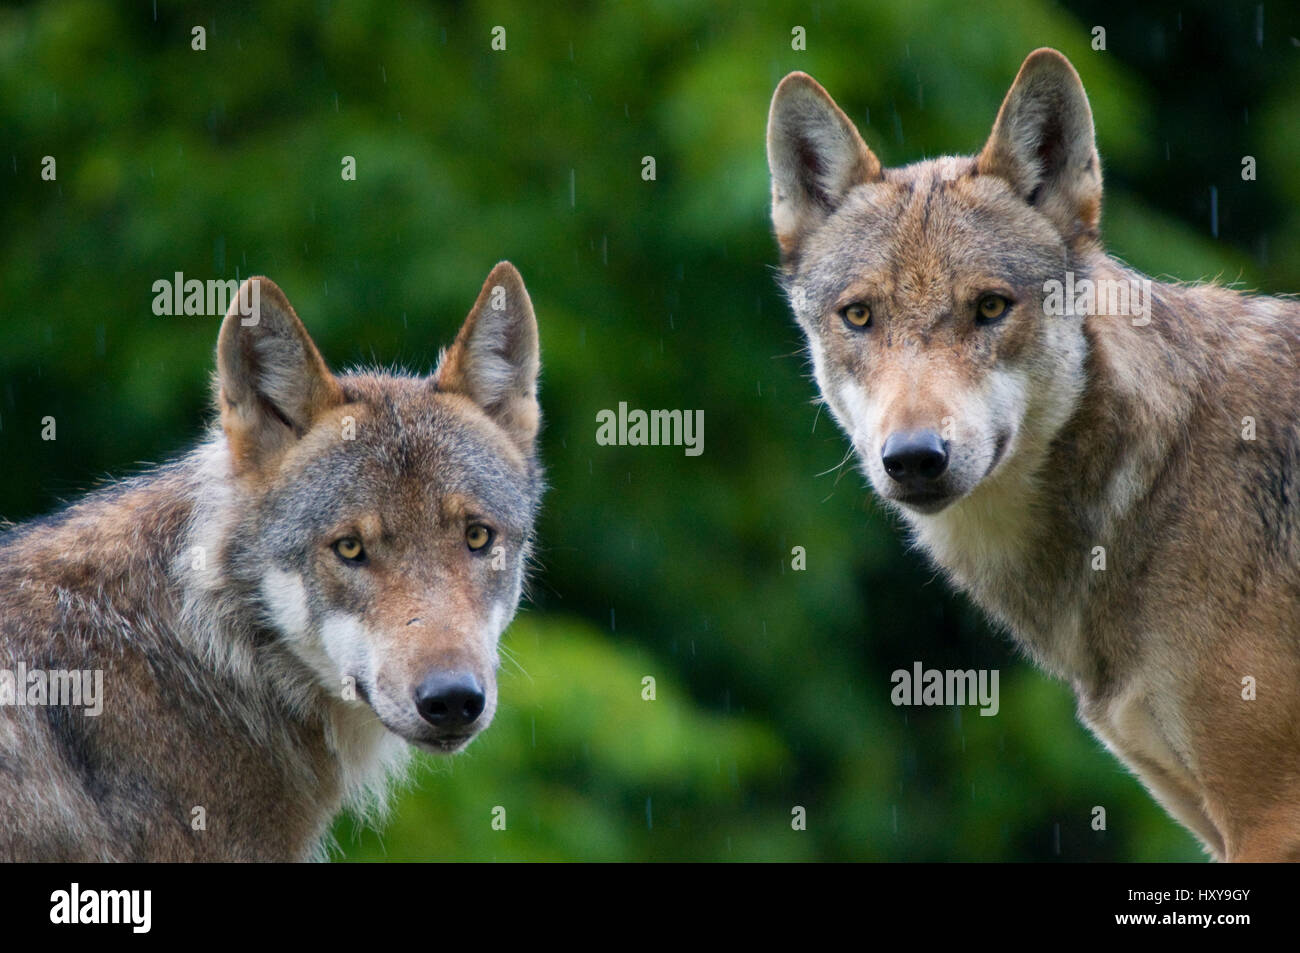 Two Grey wolves (Canis lupus) head portraits with damp coats from rain shower, captive. Stock Photo